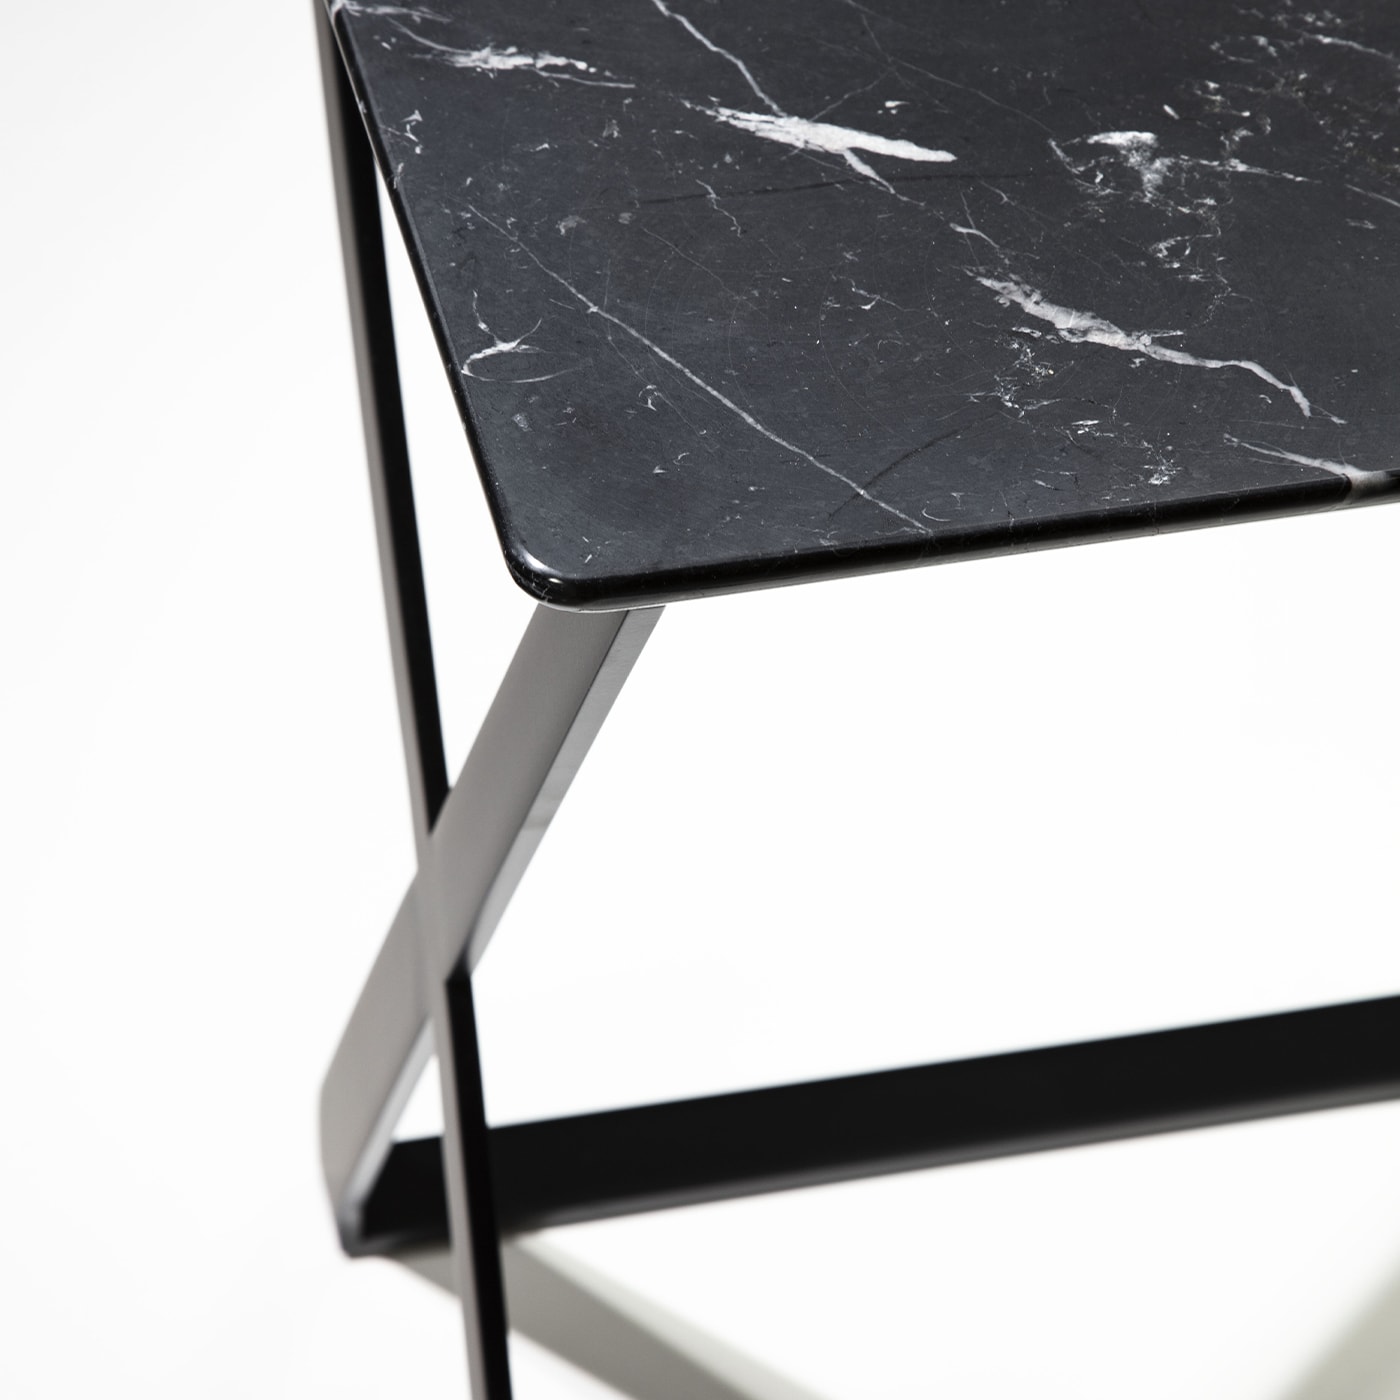 Crossover Marquinia marble side table - Enrico Pellizzoni